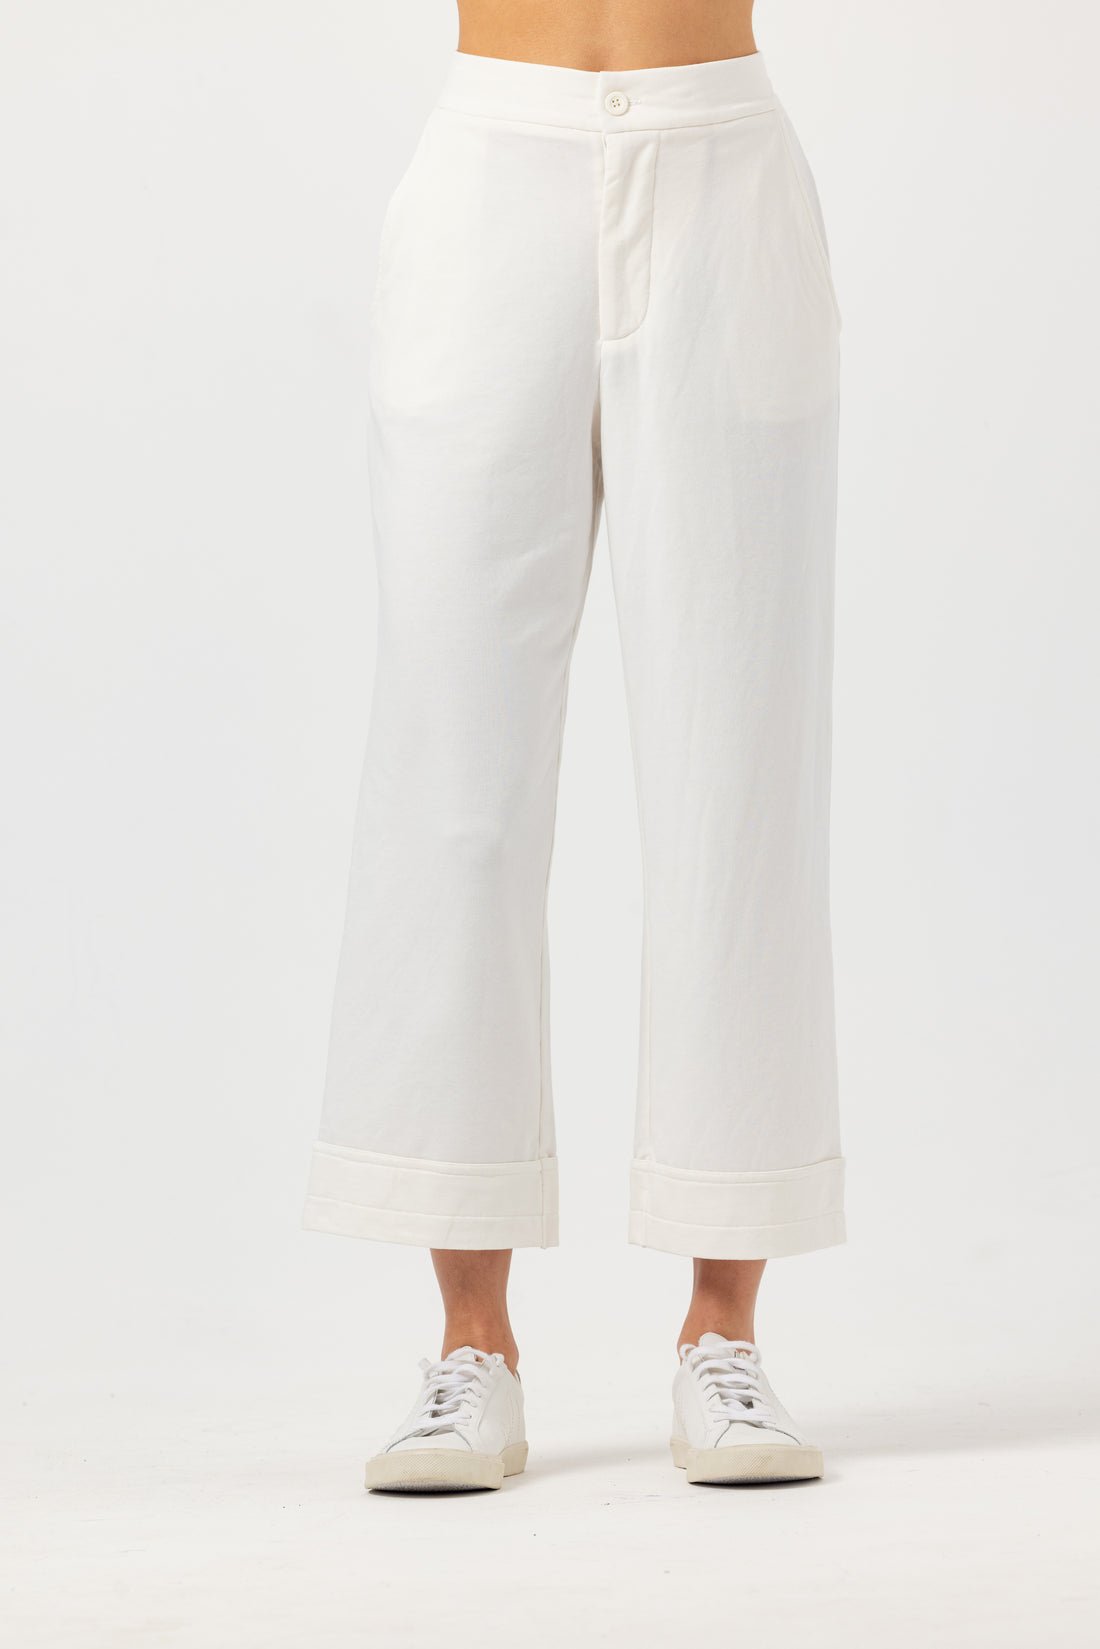 LUCIA CROPPED PANT - COCONUT MILK